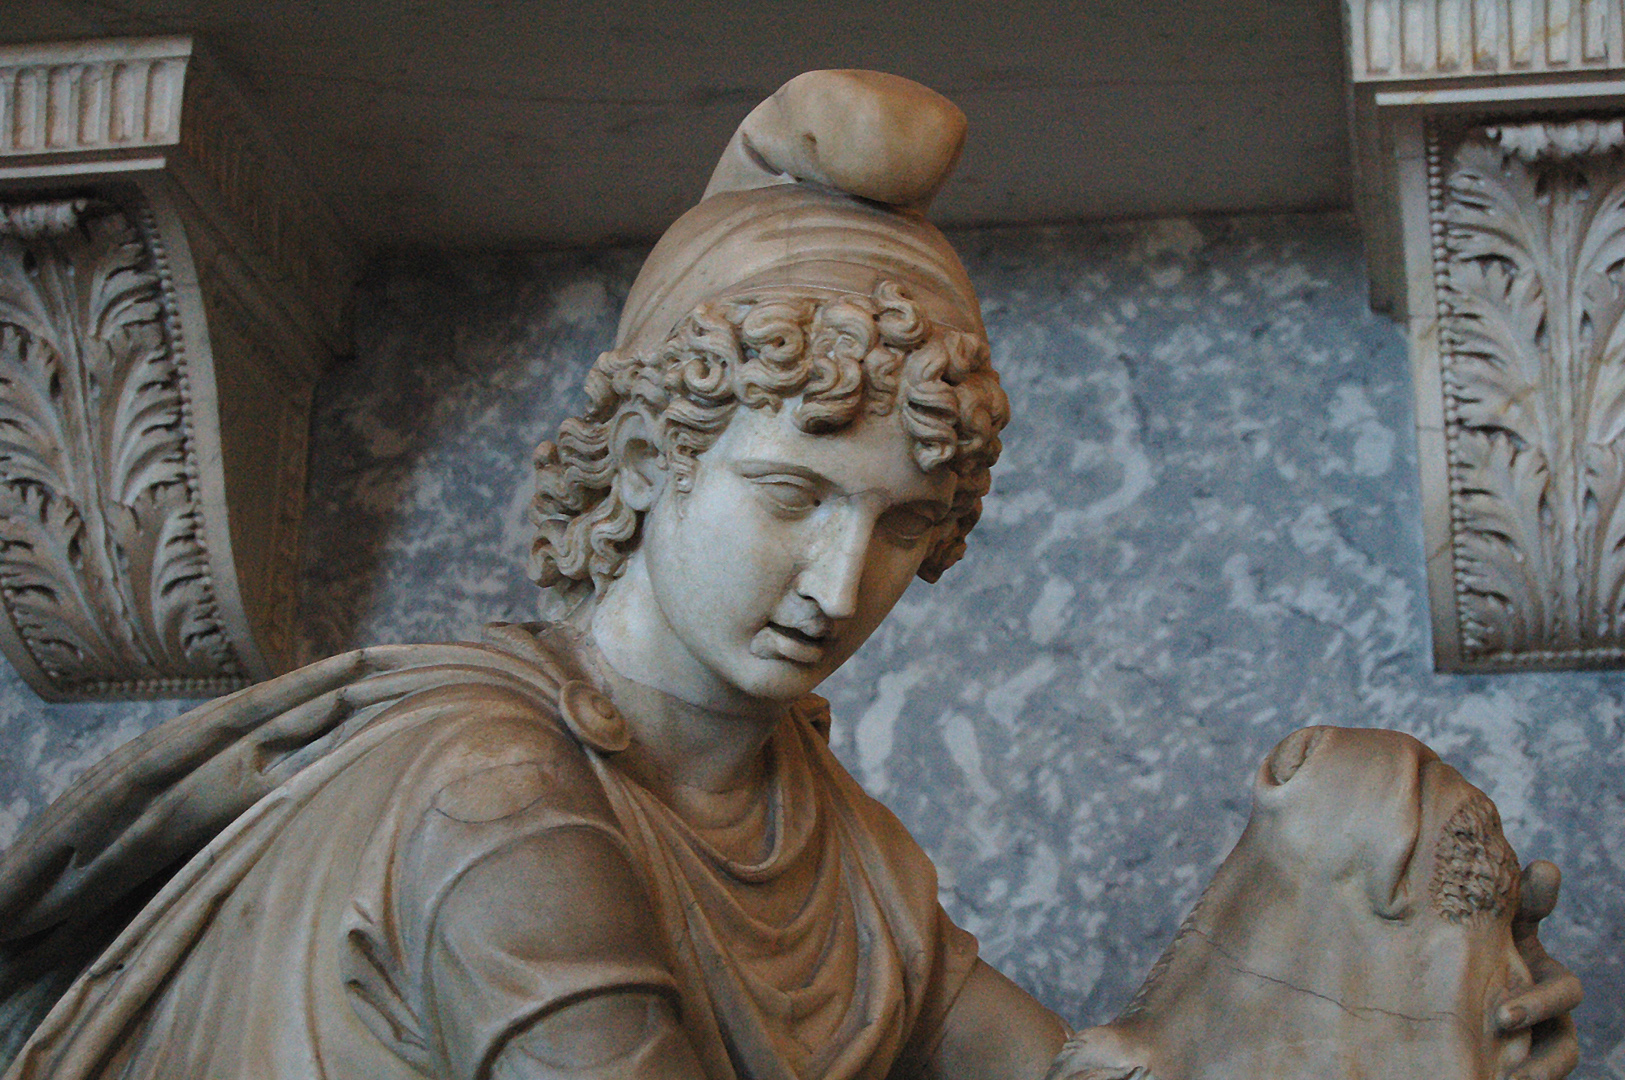 Mithras die een stier slacht (detail), Rome.; Mithras and the Bull. Vatican Museums, Rome.